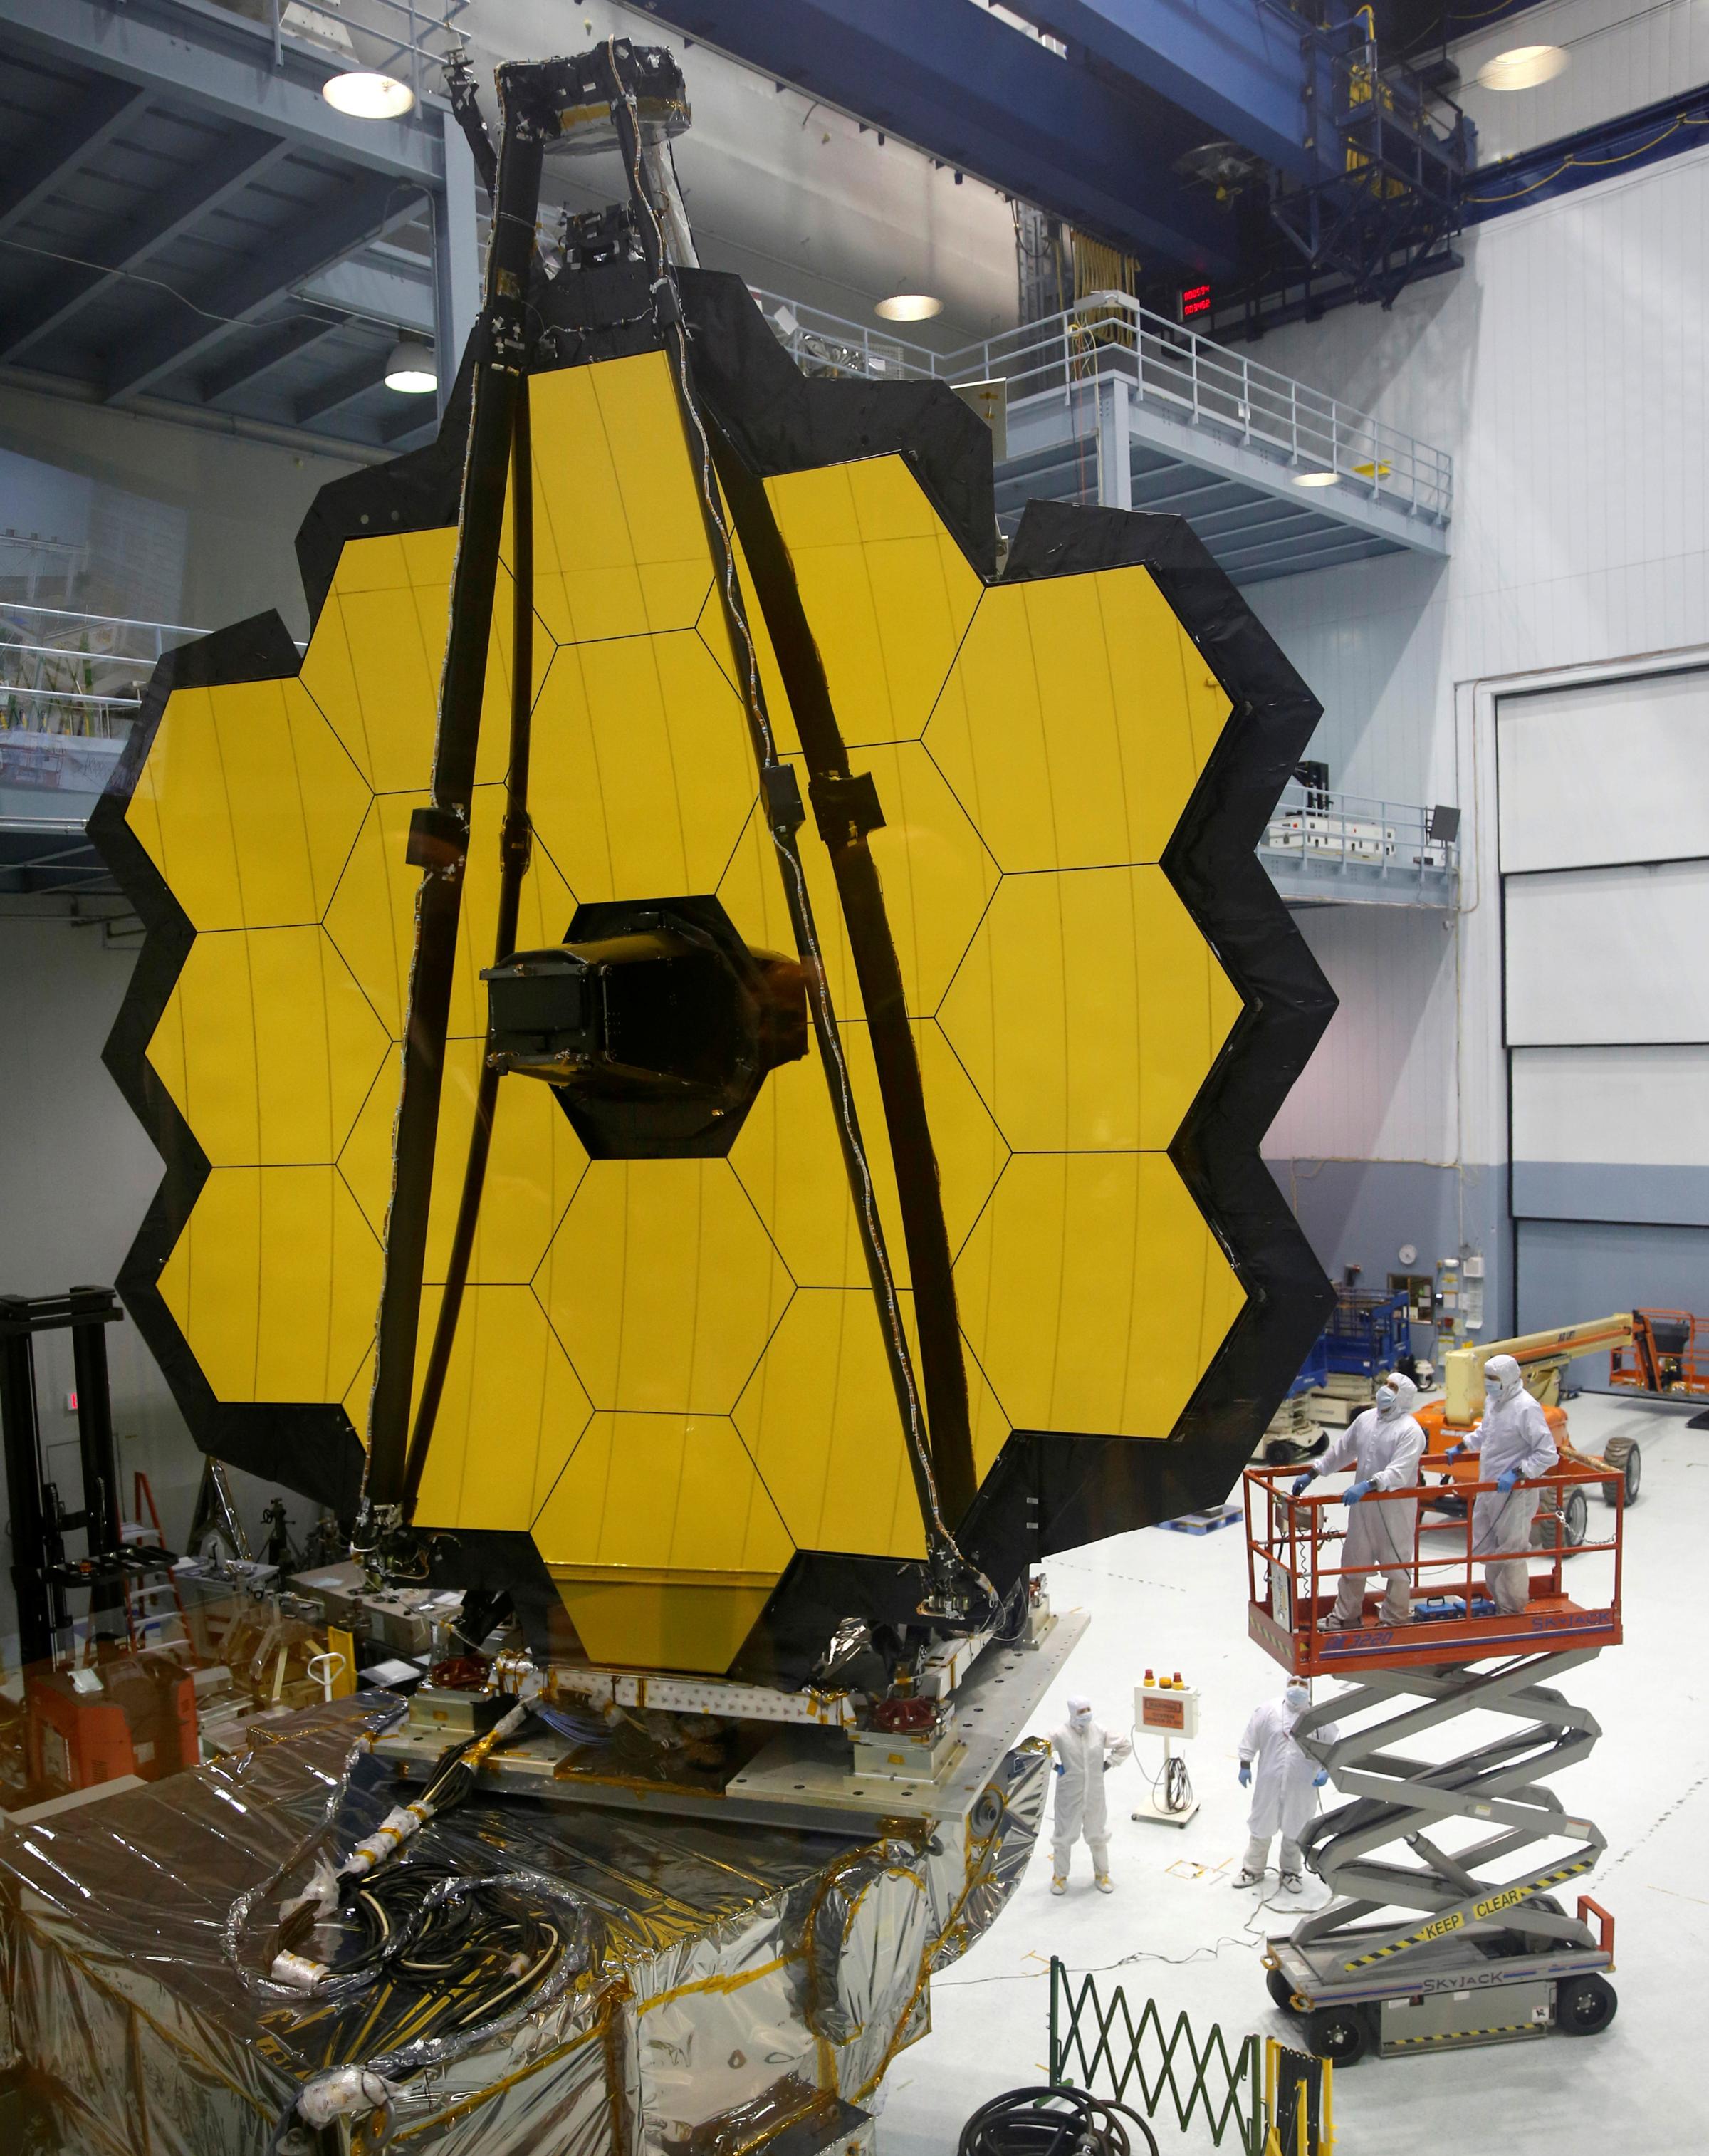 NASA workers look up at the James Webb Space Telescope Mirror during it's media reveal at NASAís Goddard Space Flight Center at Greenbelt